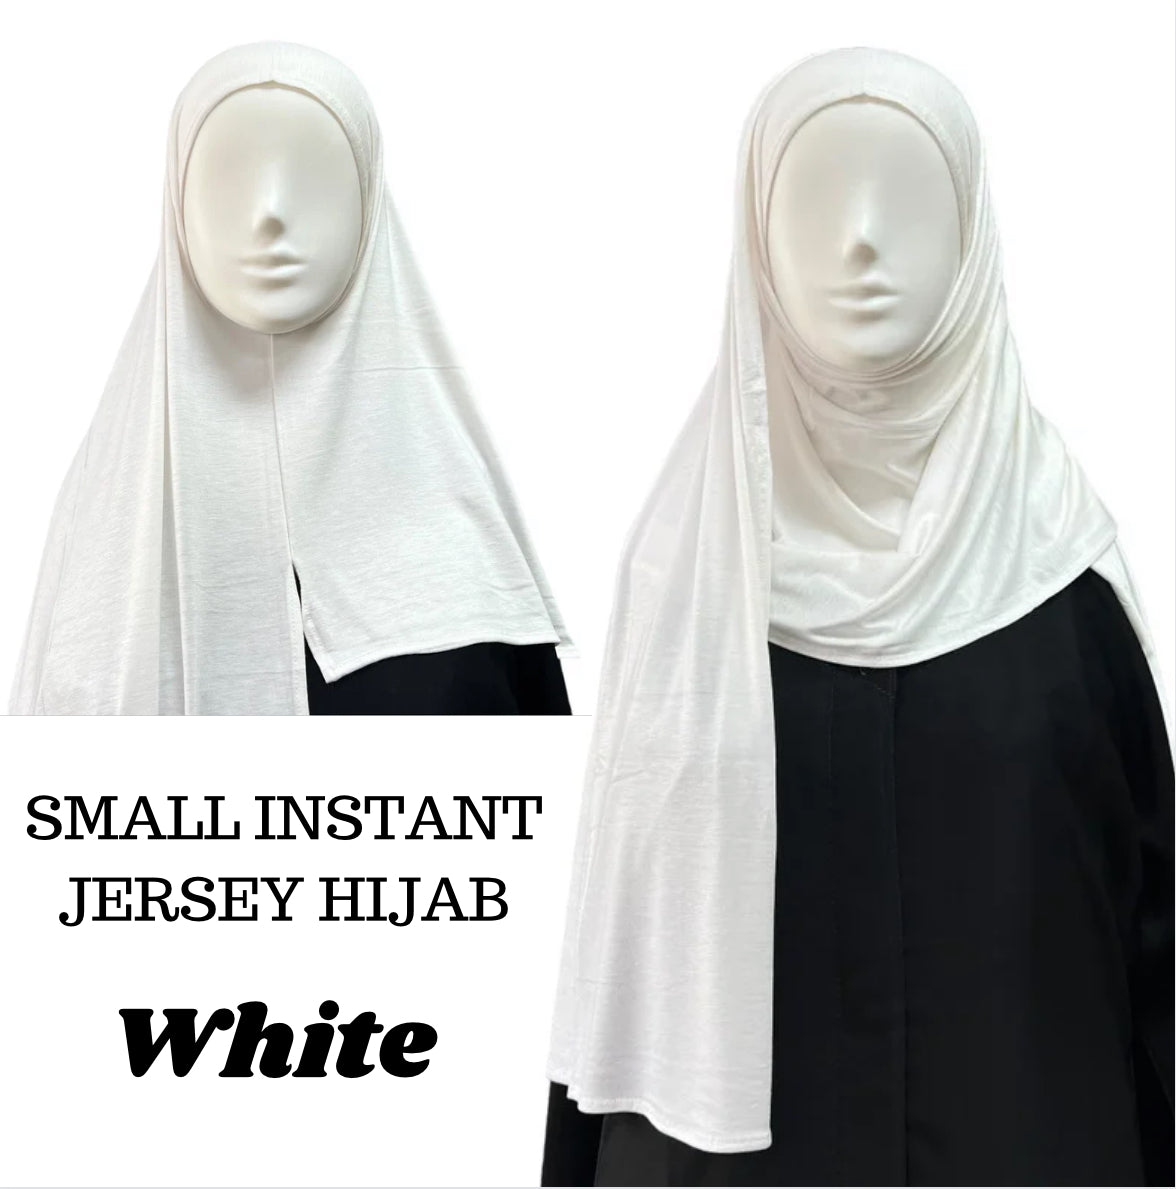 Small Instant Jersey Hijabs